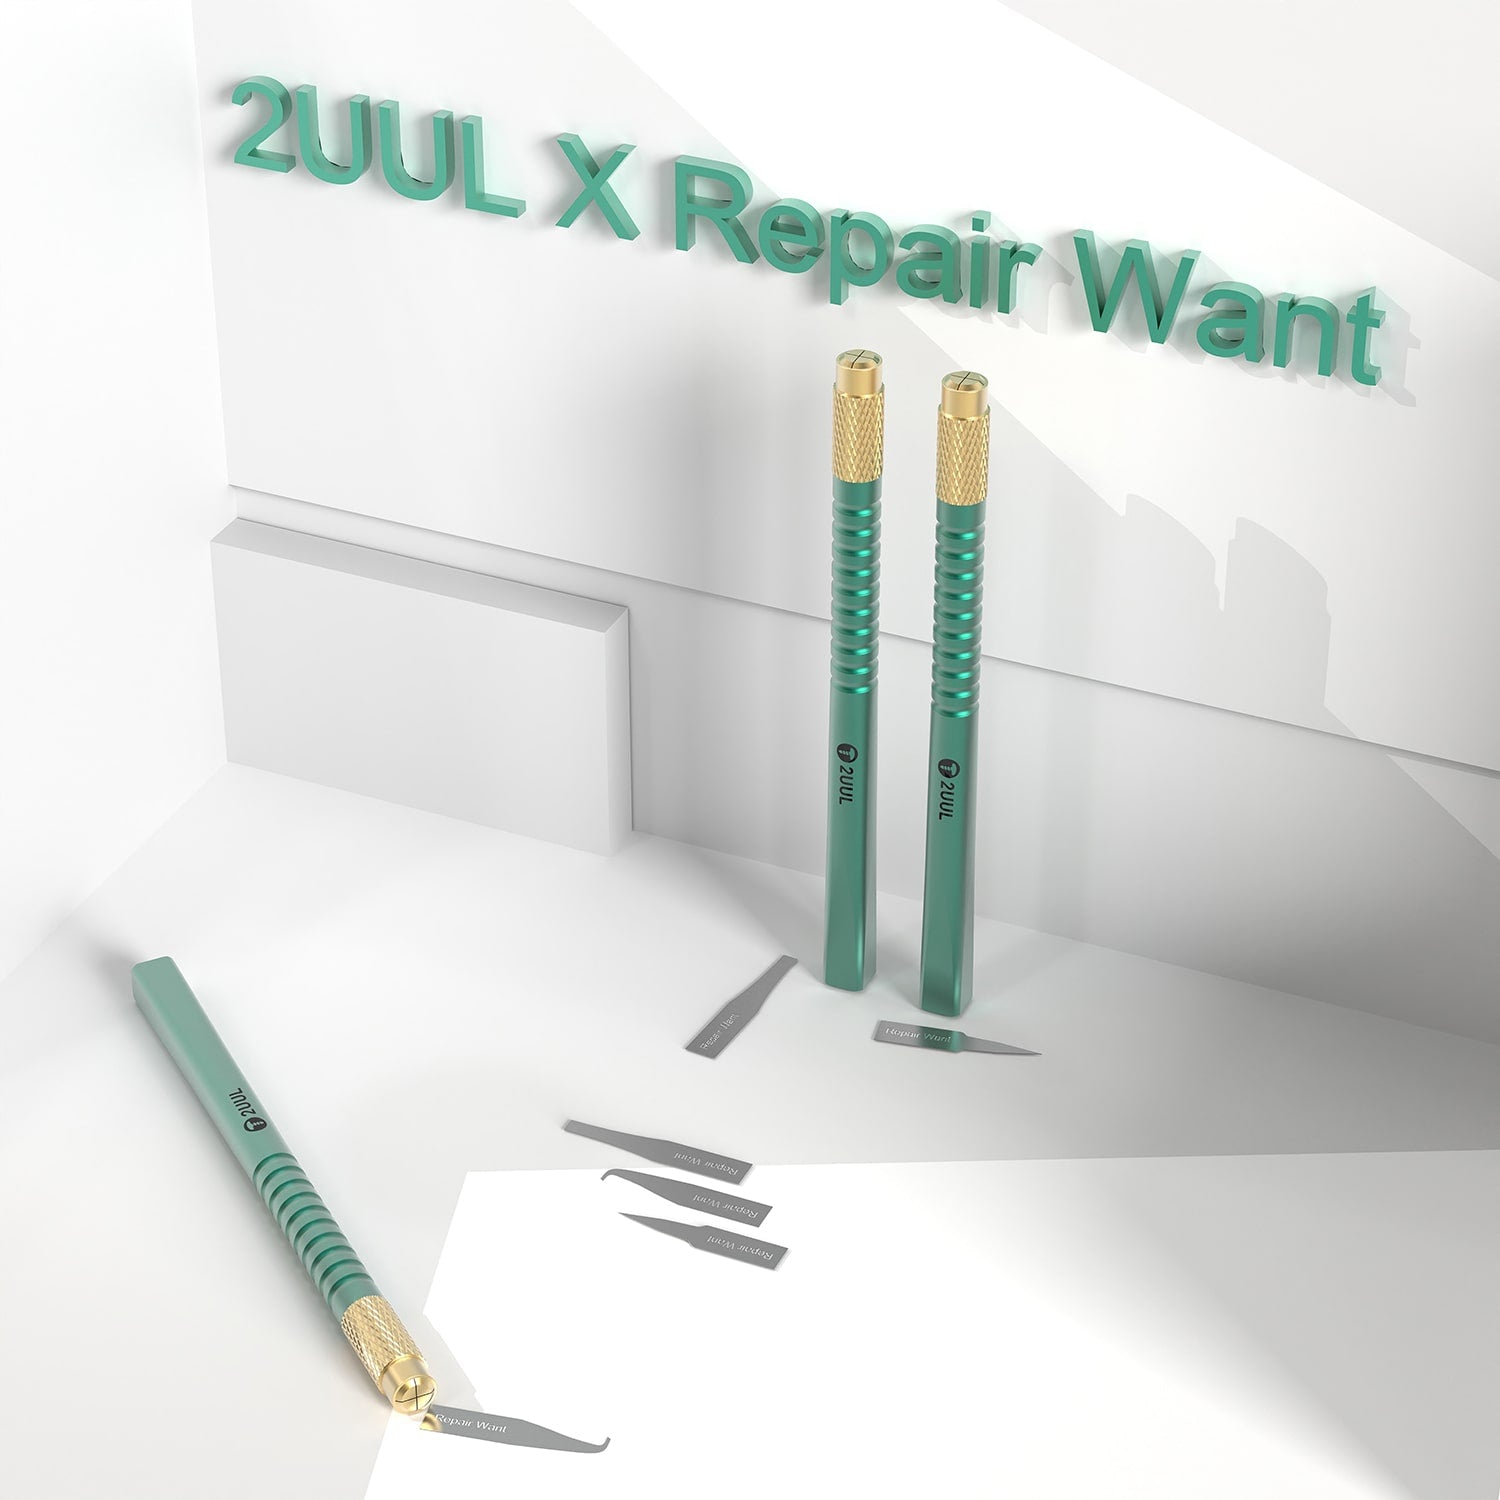 2UUL X REPAIR WANT Y-C-S 3 IN 1 BLADES SET FOR IC DISASSEMBLE